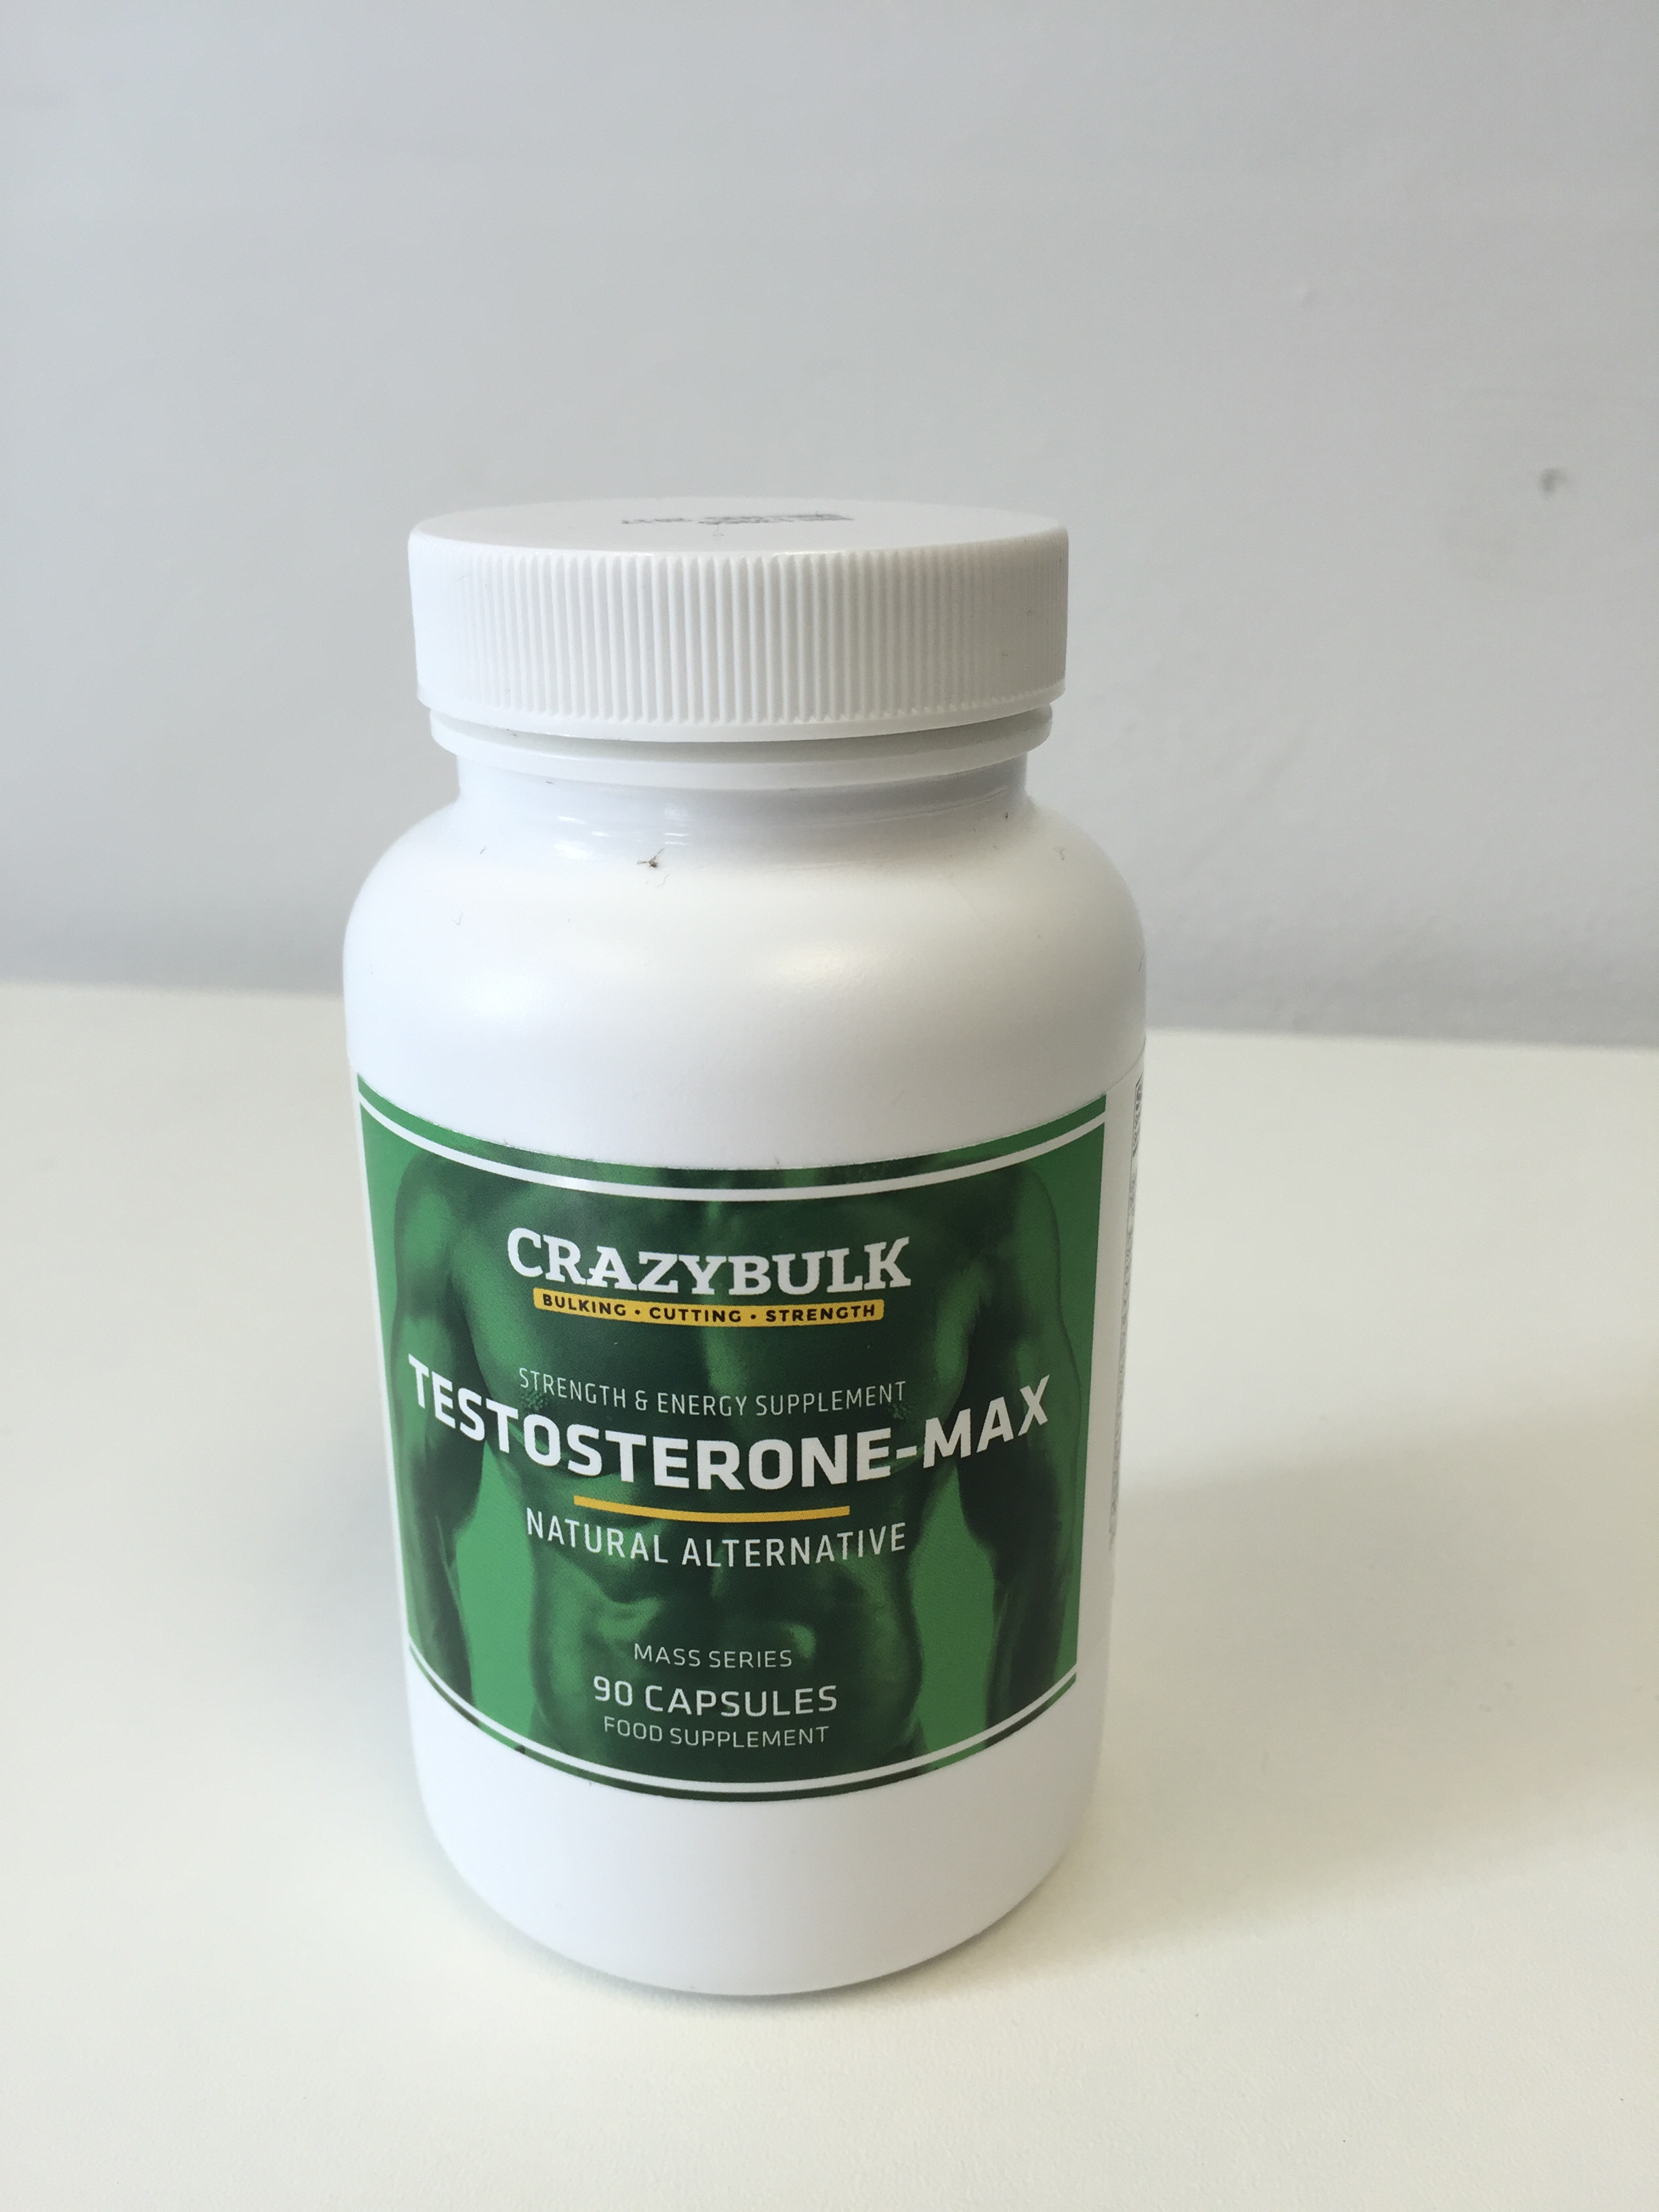 Growth hormone peptides for fat loss